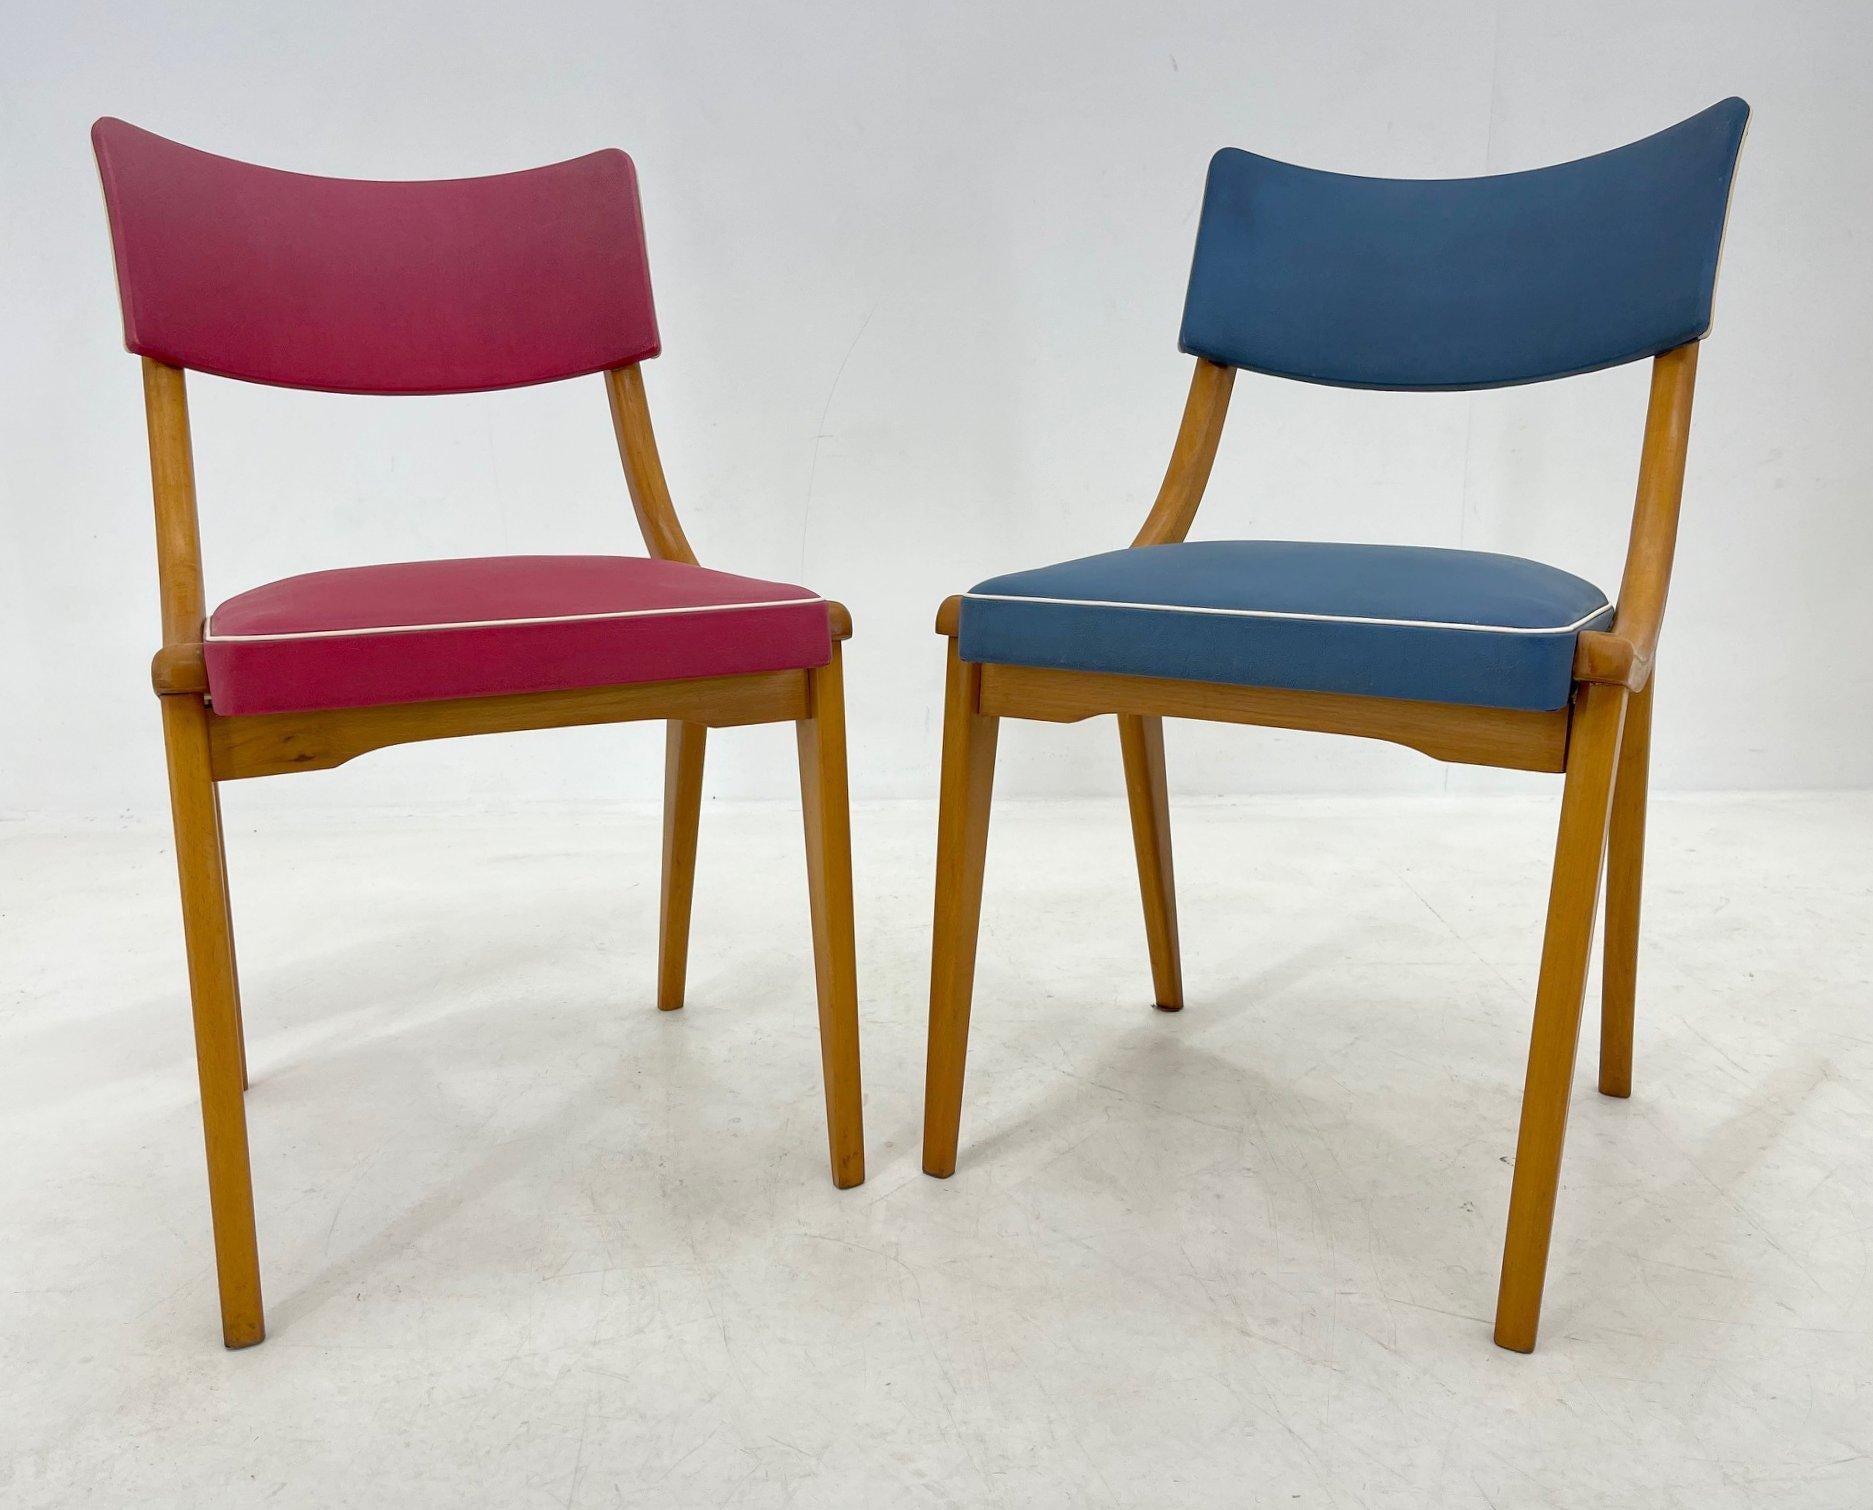 Set of two vintage German chairs in red and blue colour. 
All imperfections are visible in the photos.